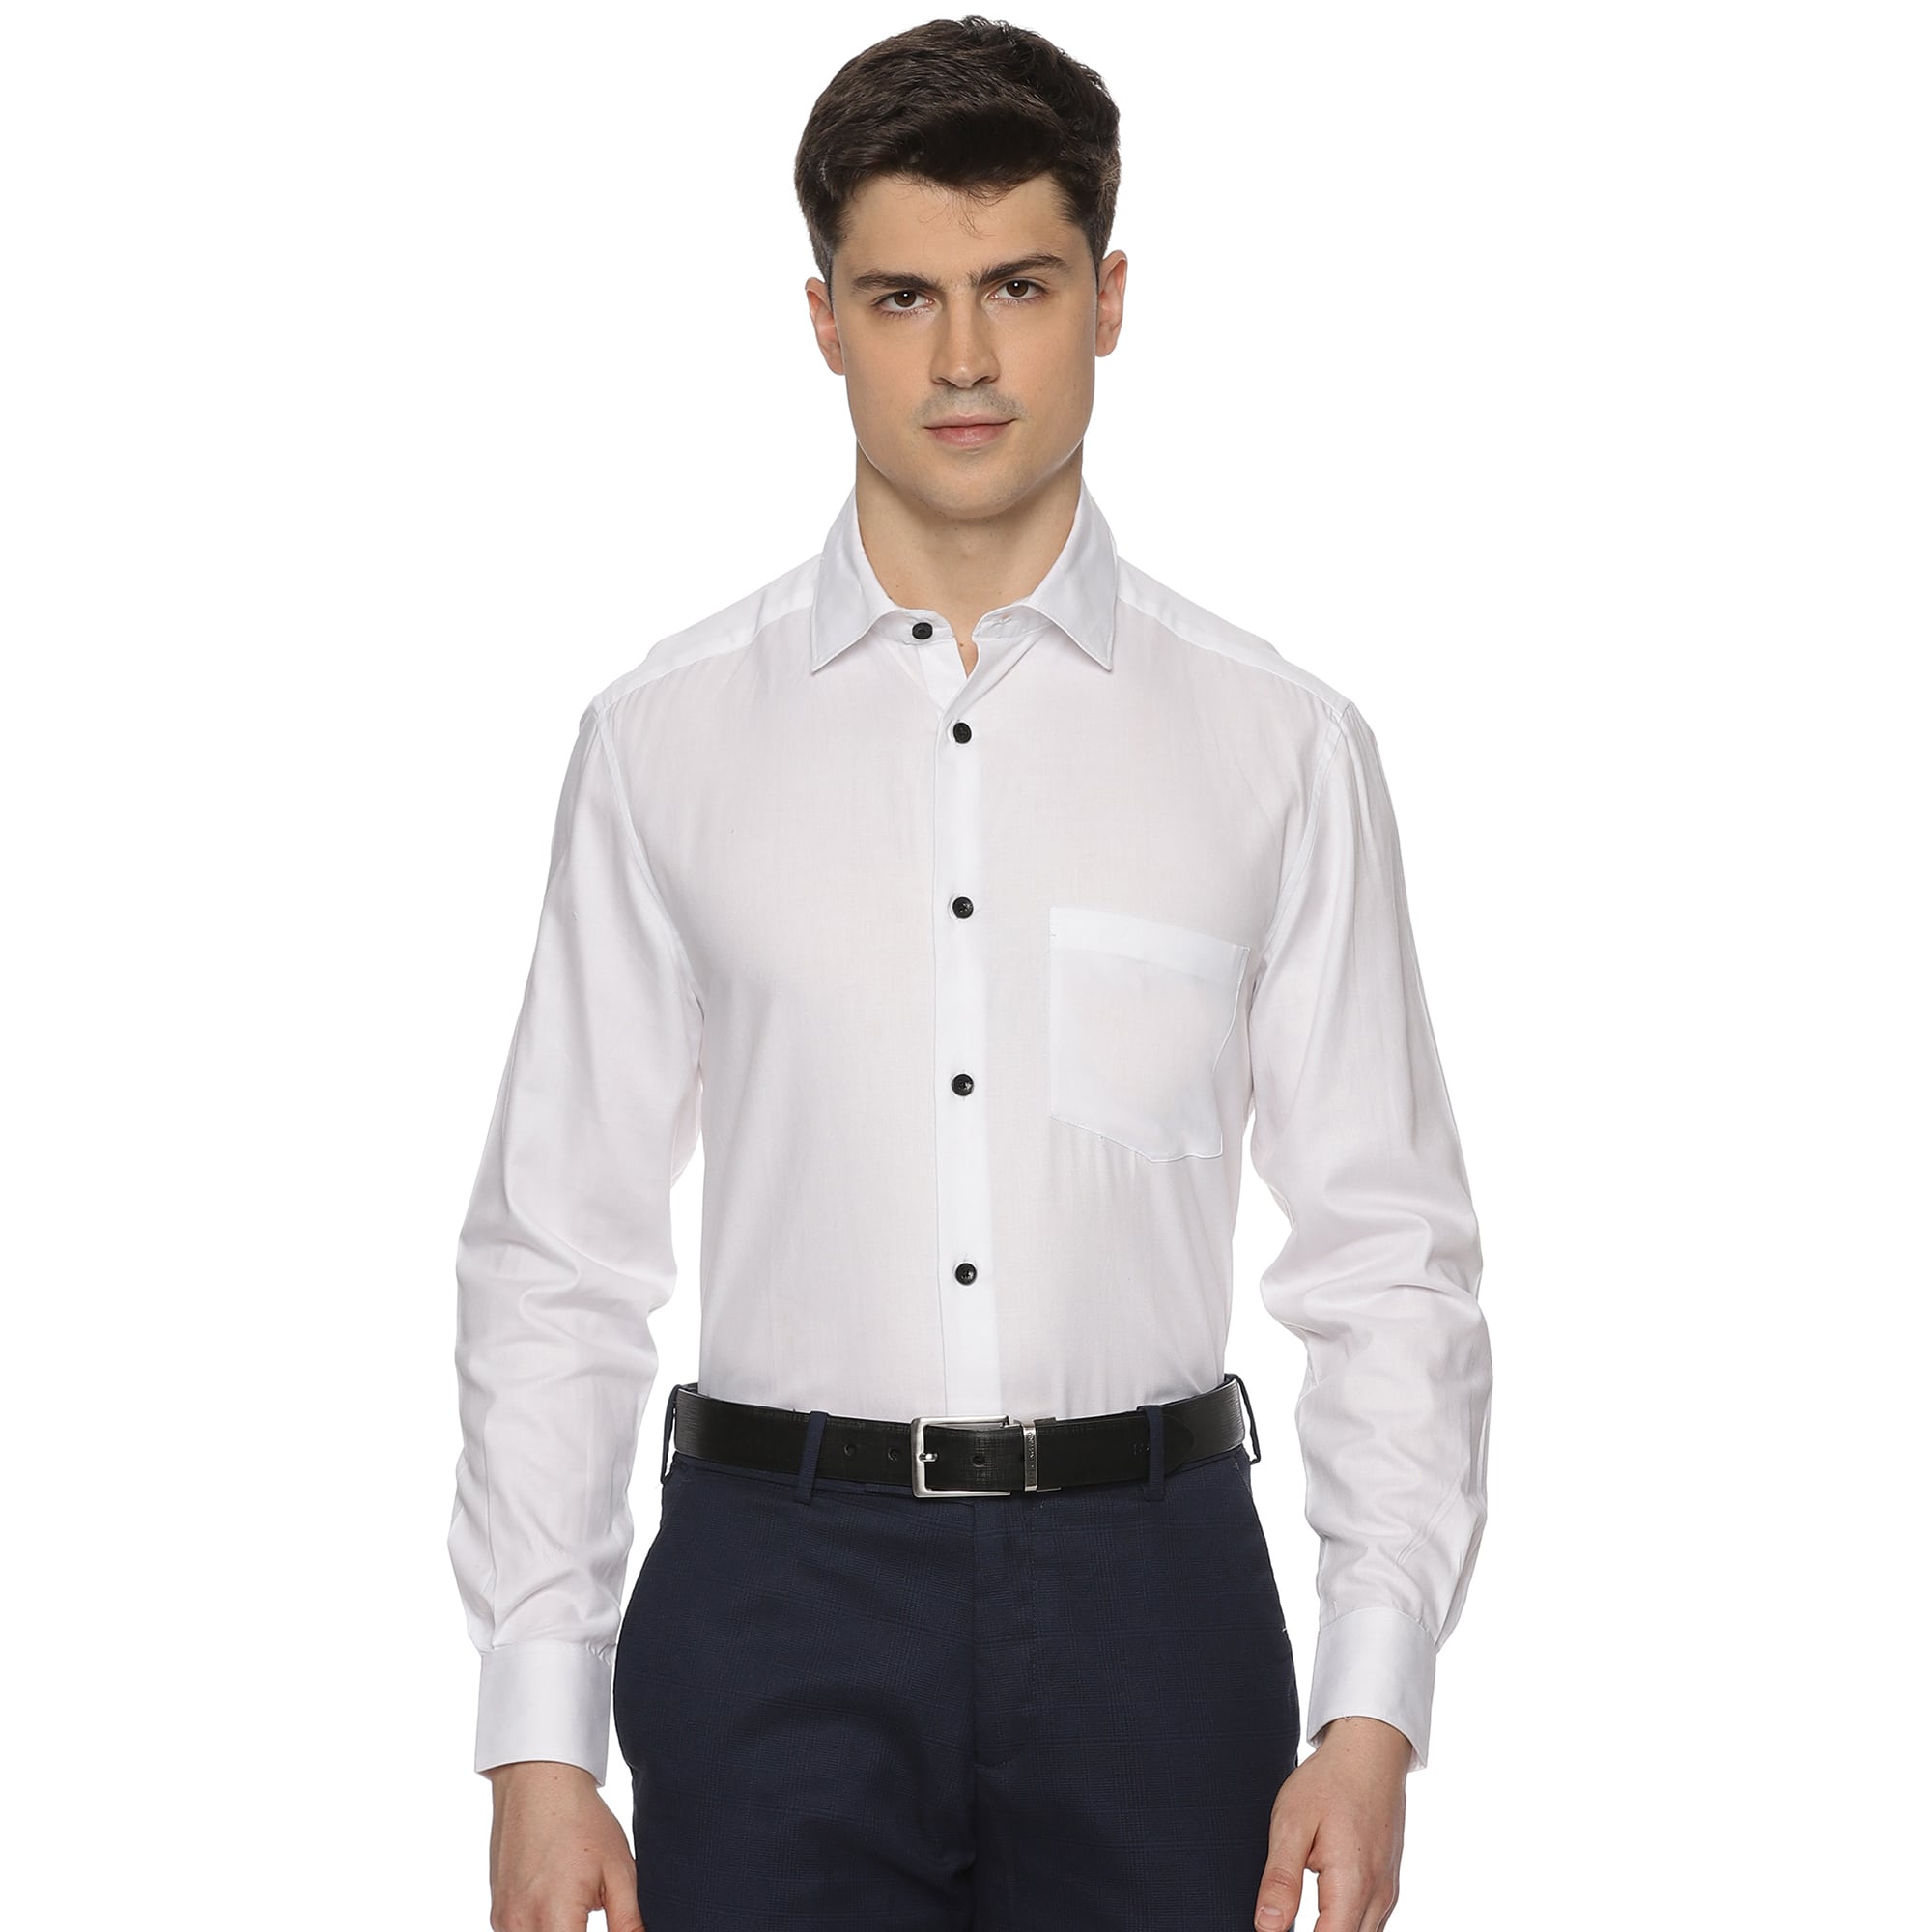 Eclipse Twill Solid Shirt In White Regular Fit - The Formal Club